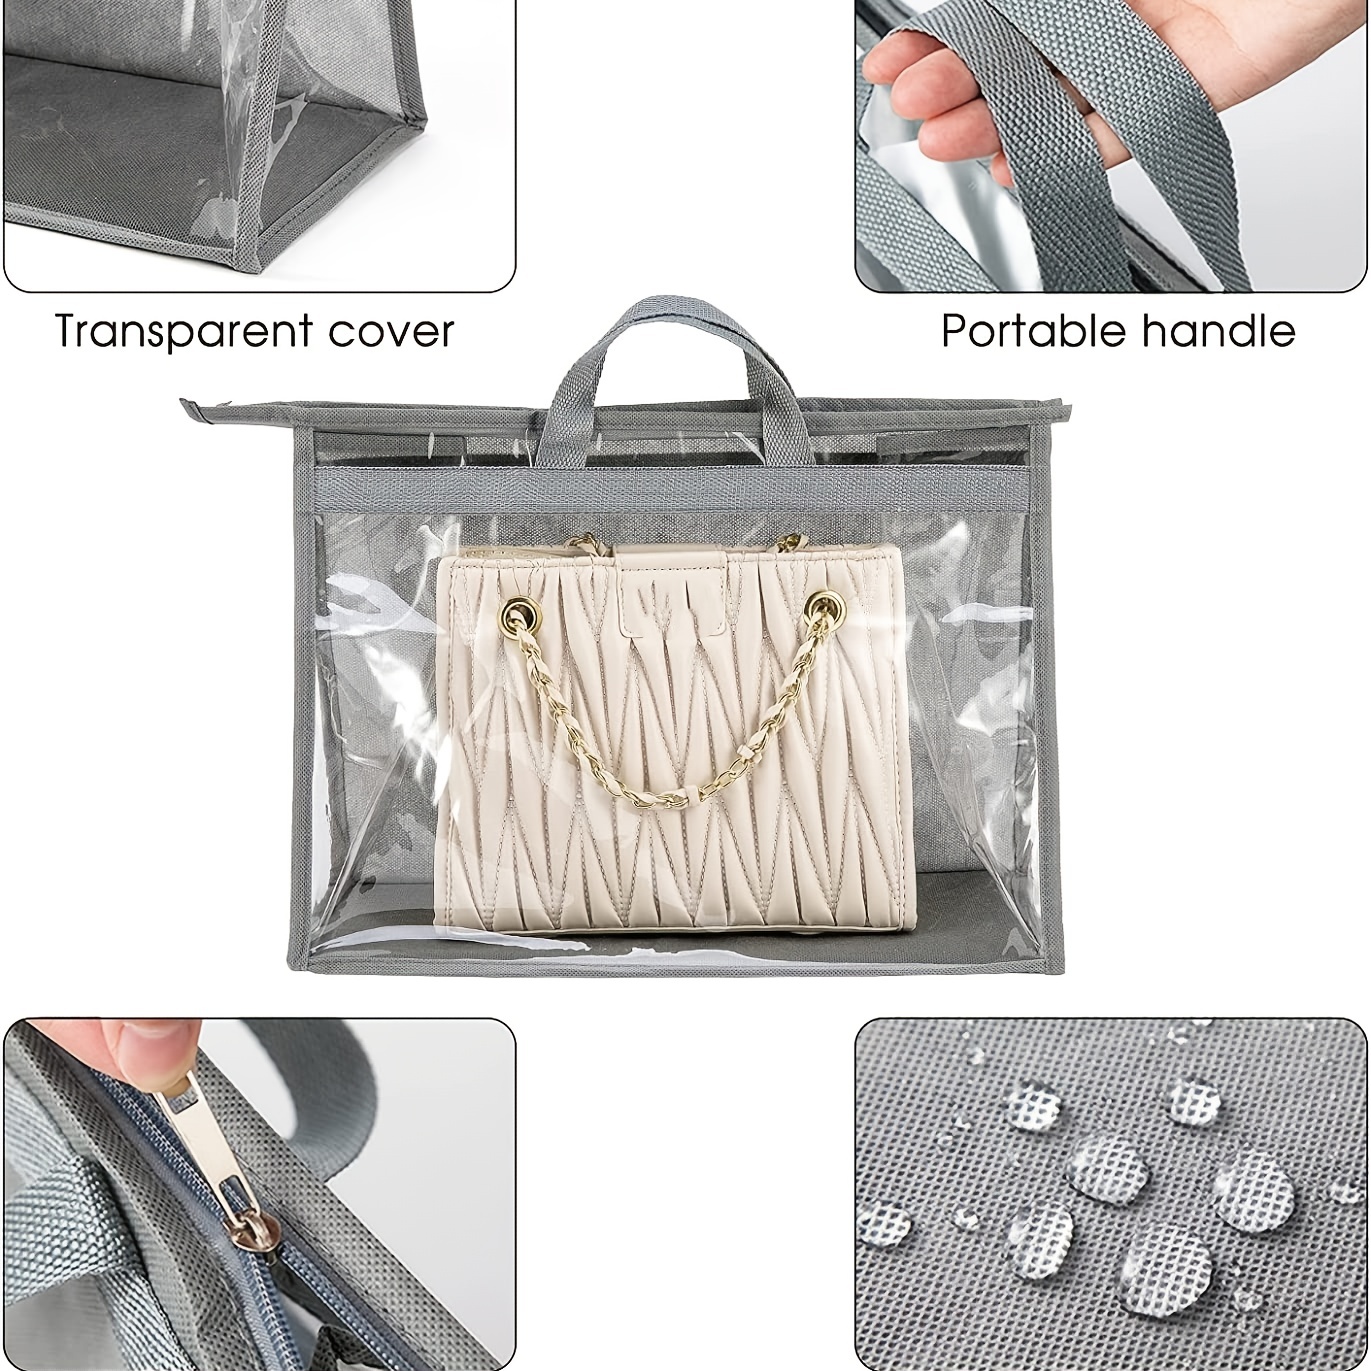 Dust cover bags for handbags